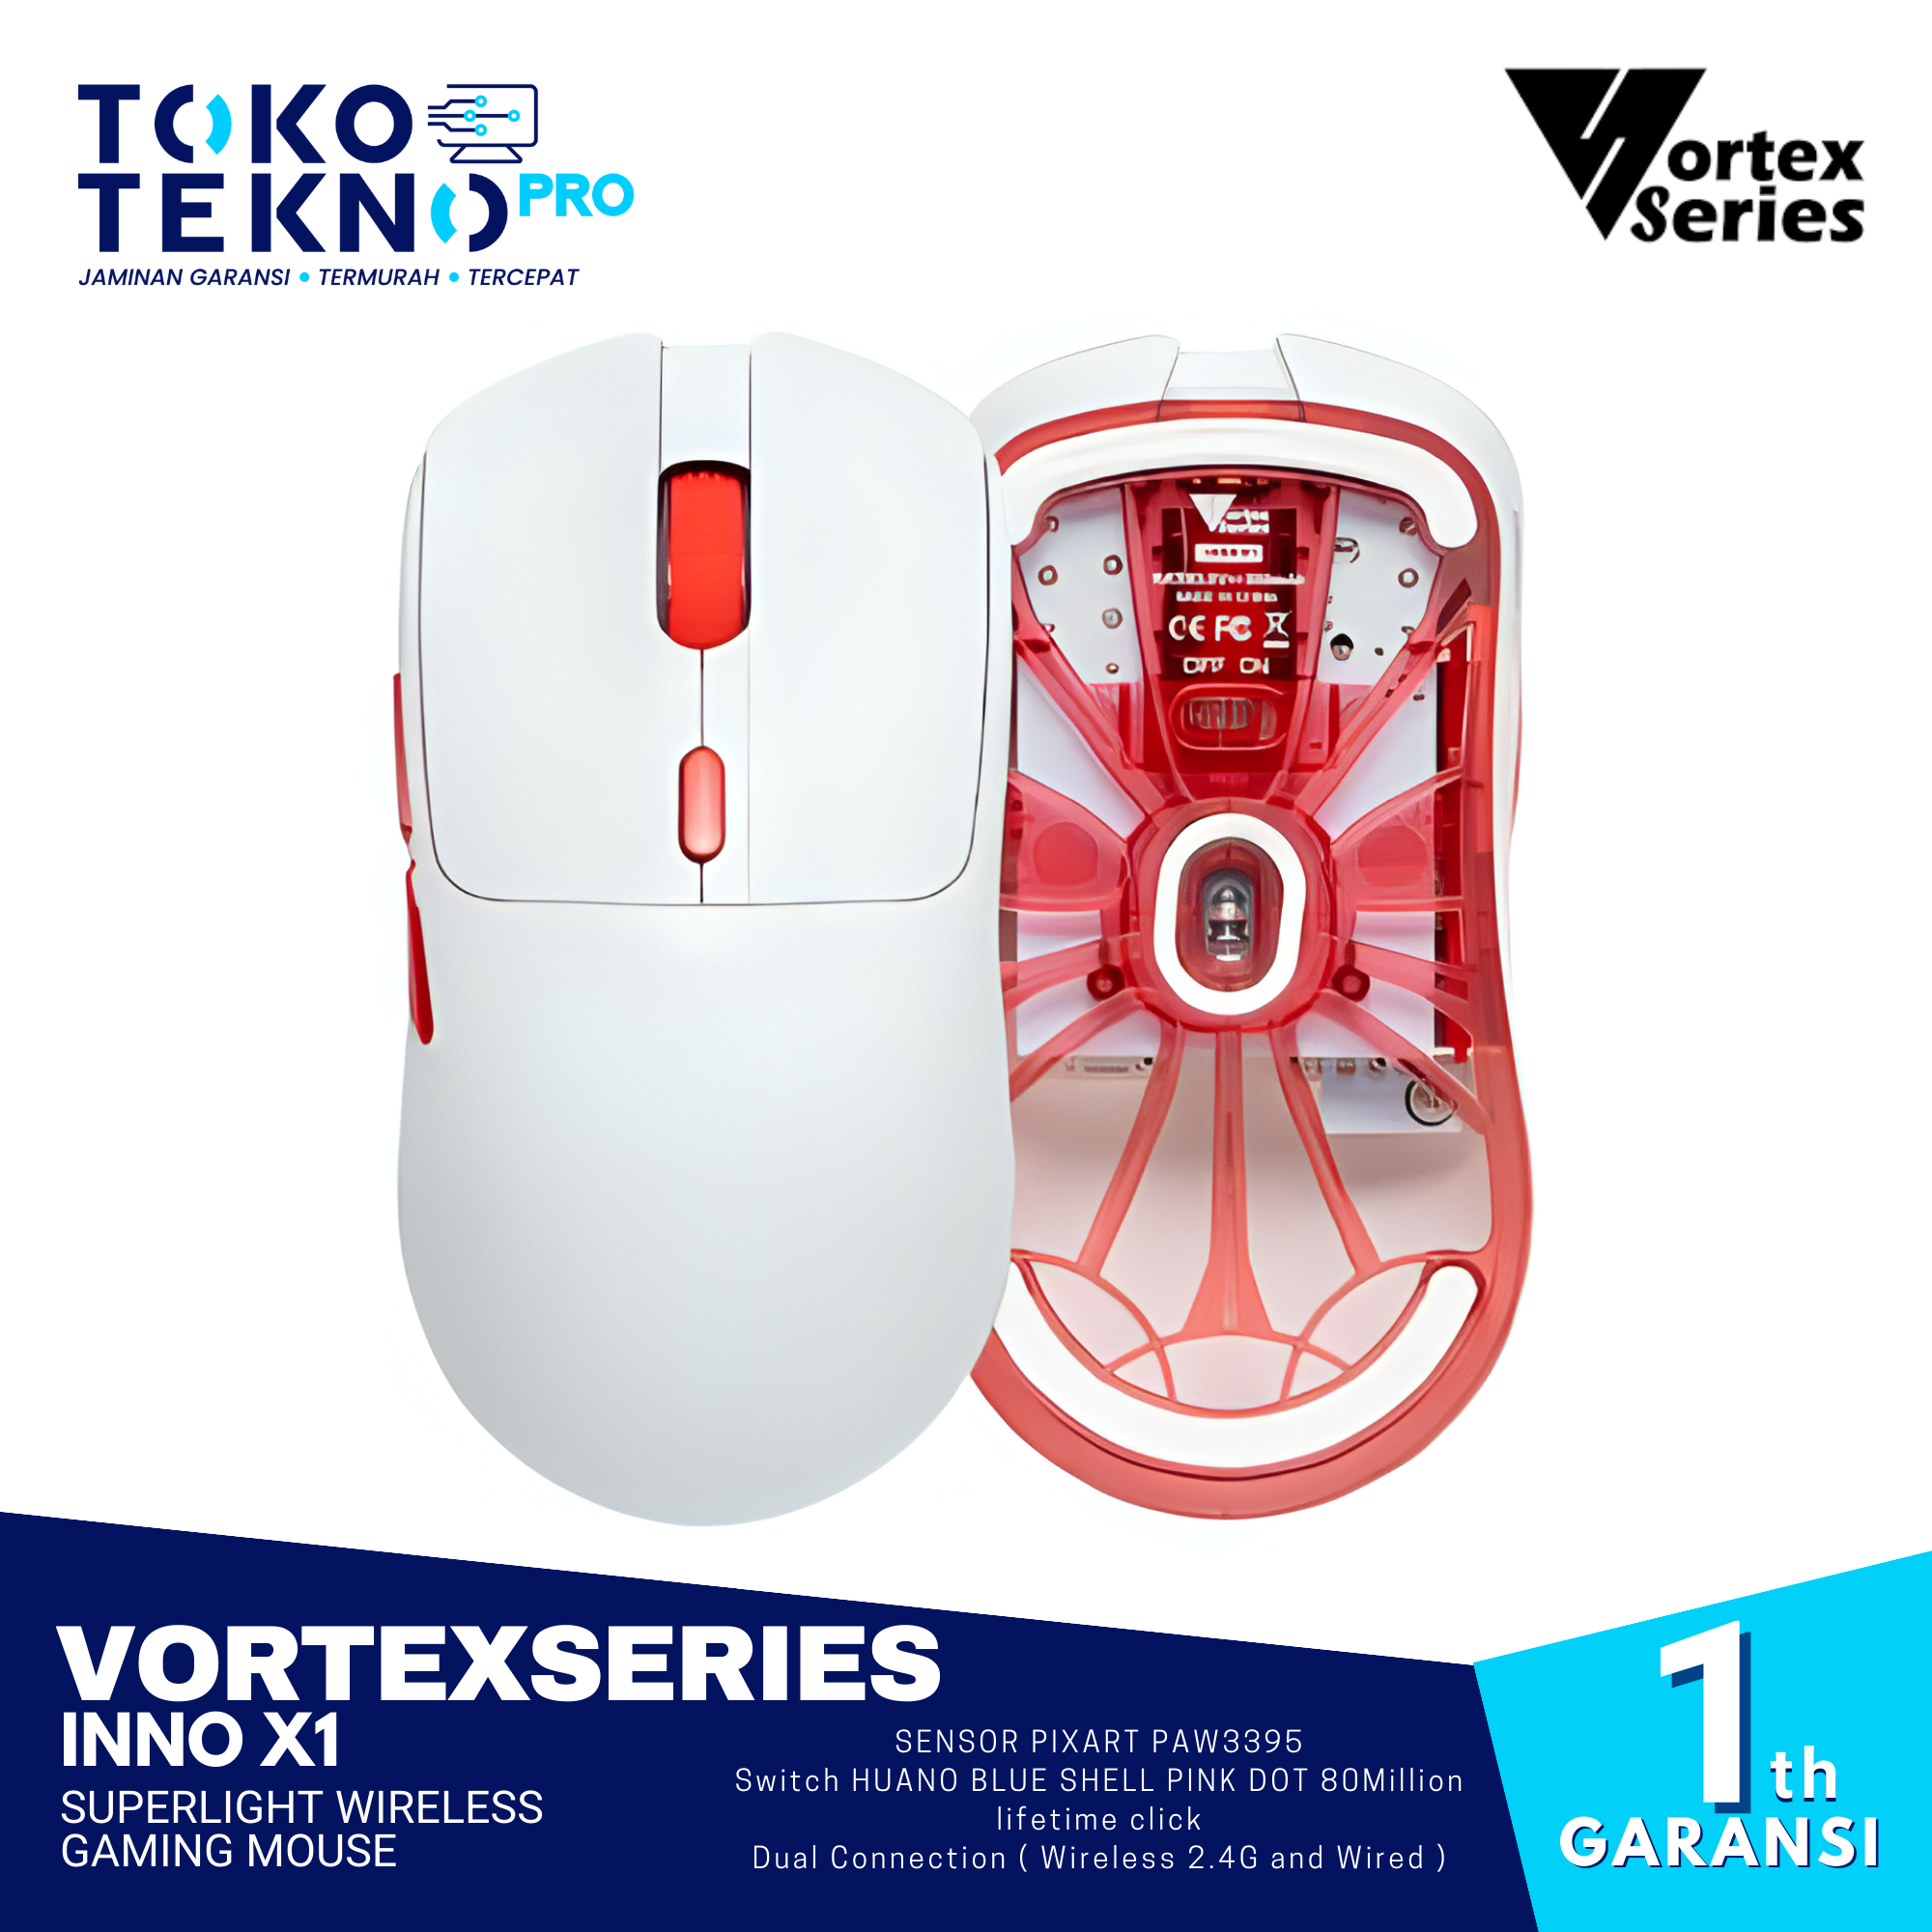 VortexSeries INNO X1 / X-1 Superlight Wireless Gaming Mouse